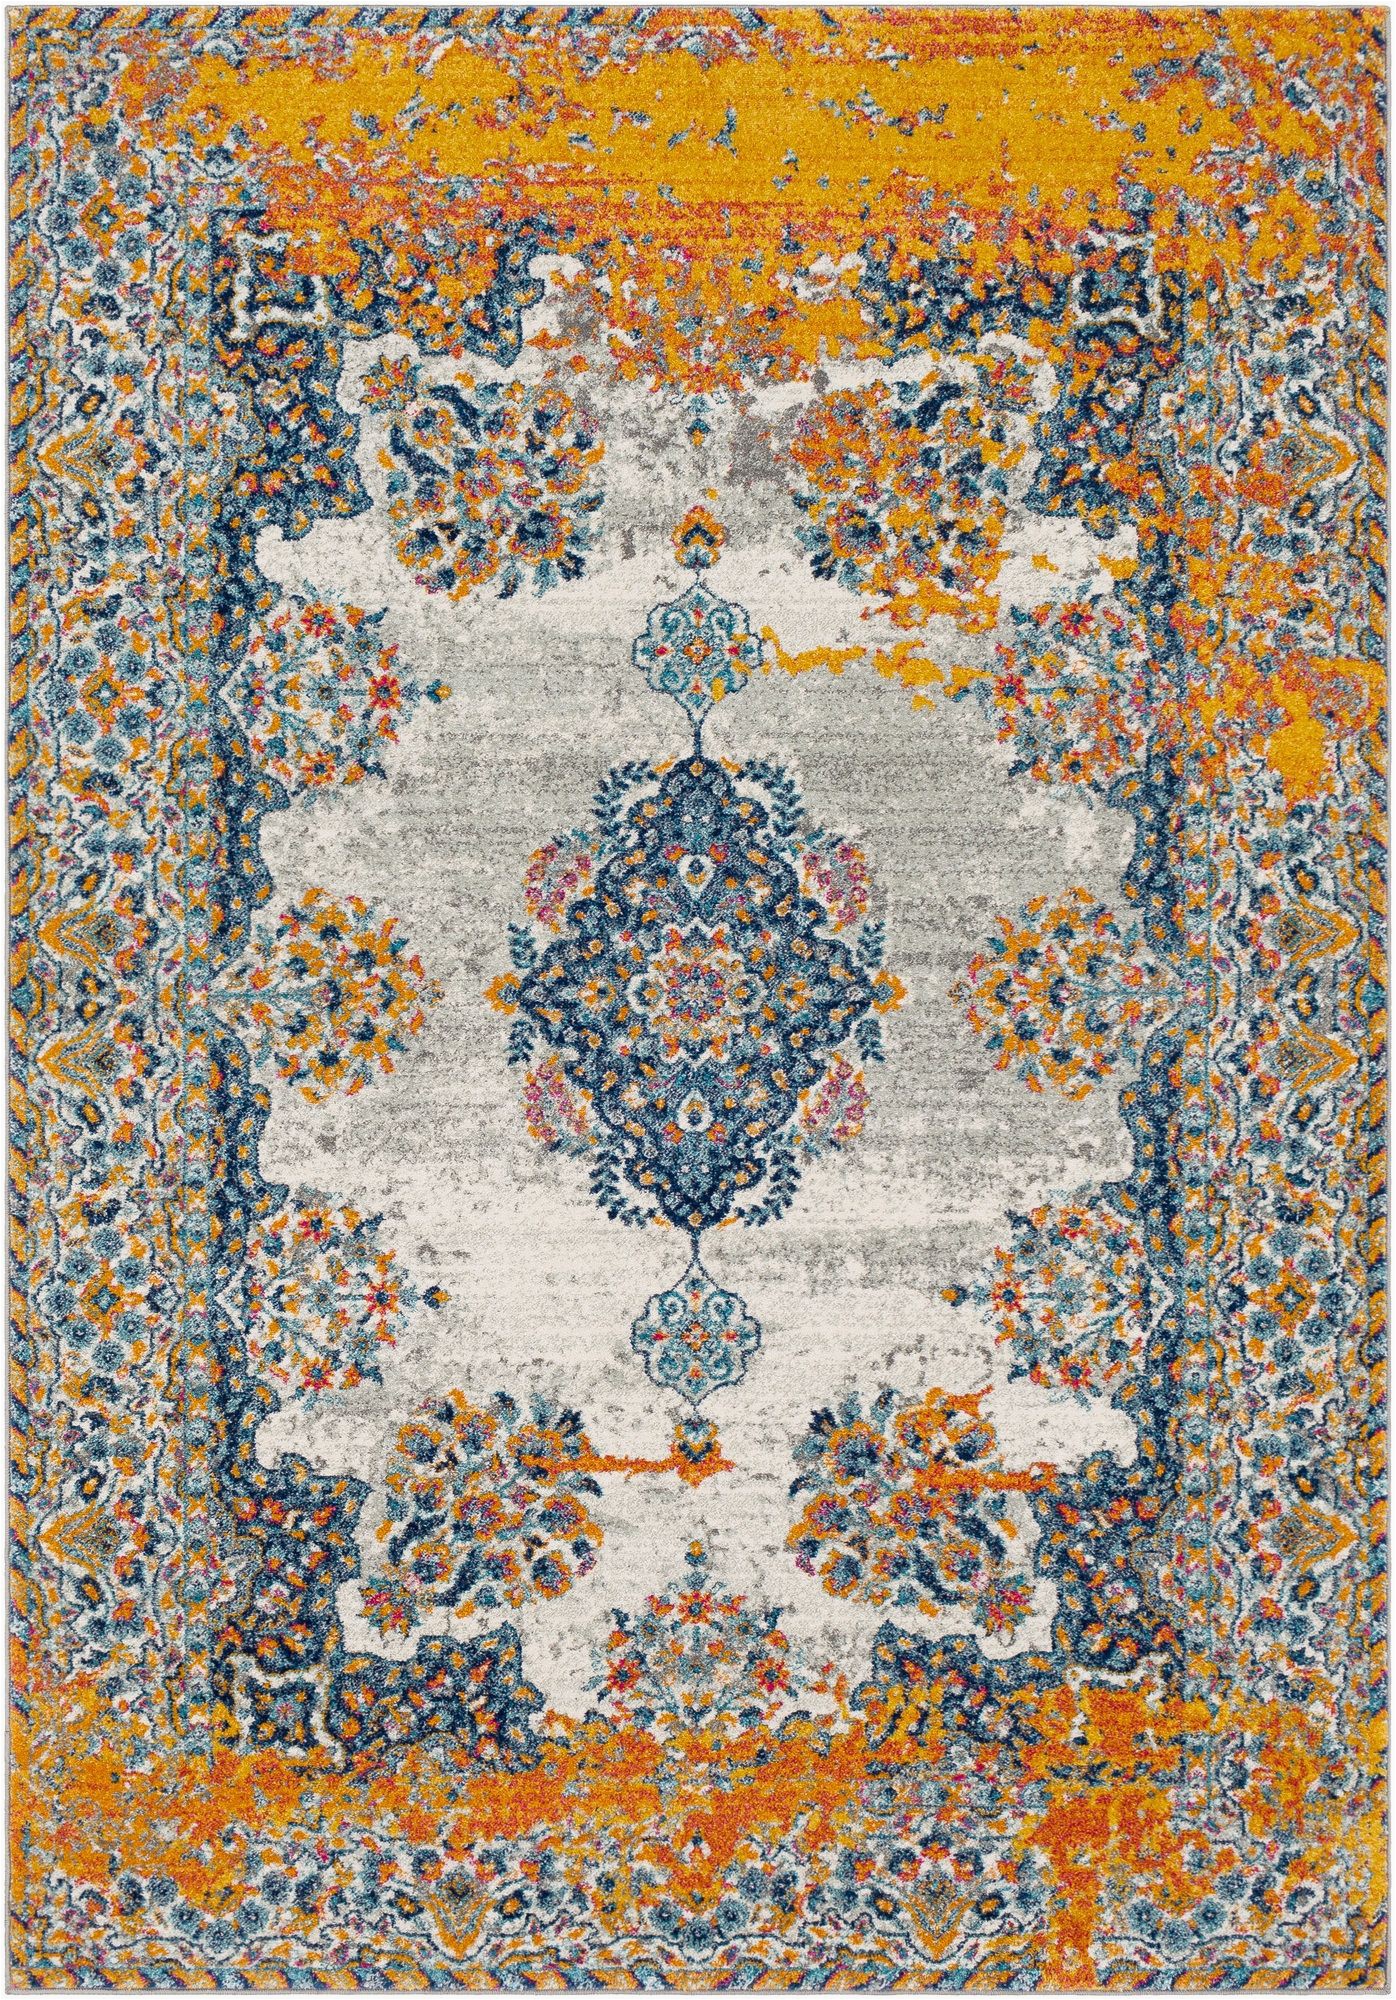 Home Accents Harput area Rug Home Accents Harput area Rug Multi In 2020